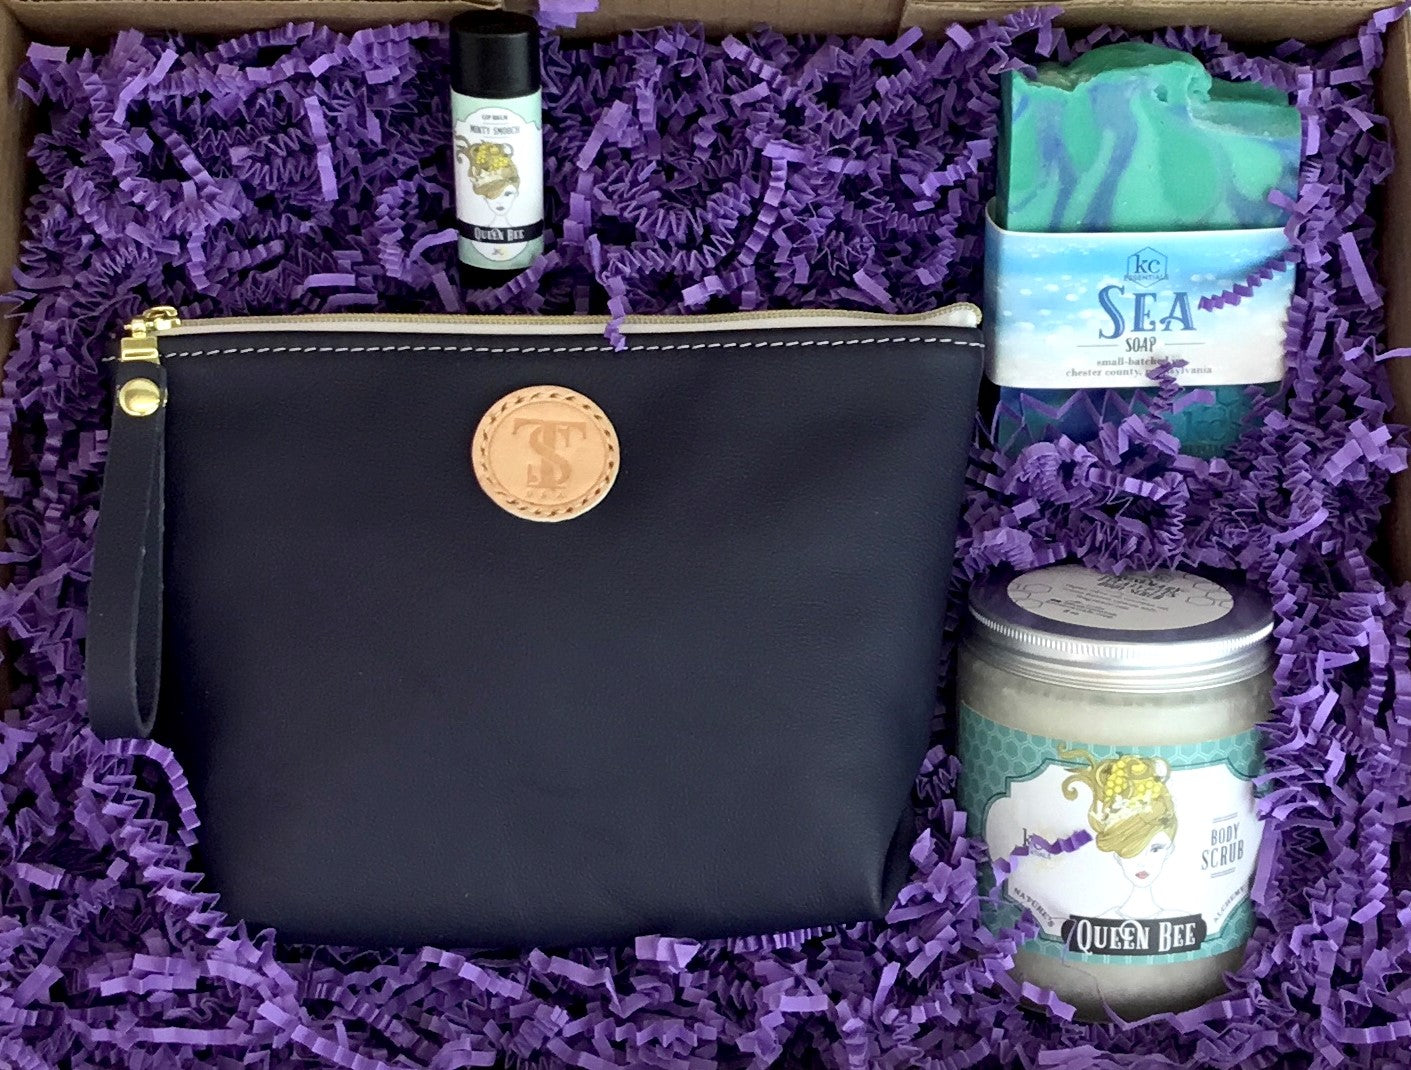 Town &amp; Shore Handcrafted Serenity Gift set featuring T5 Leather bath kit and brush bag shown in navy blue calfskin leather. KC Essentials artisan made vegan bar soap, essential oils body scrub and soothing lip balm. Arranged in gift box with sustainable eco-friendly purple crinkle paper.